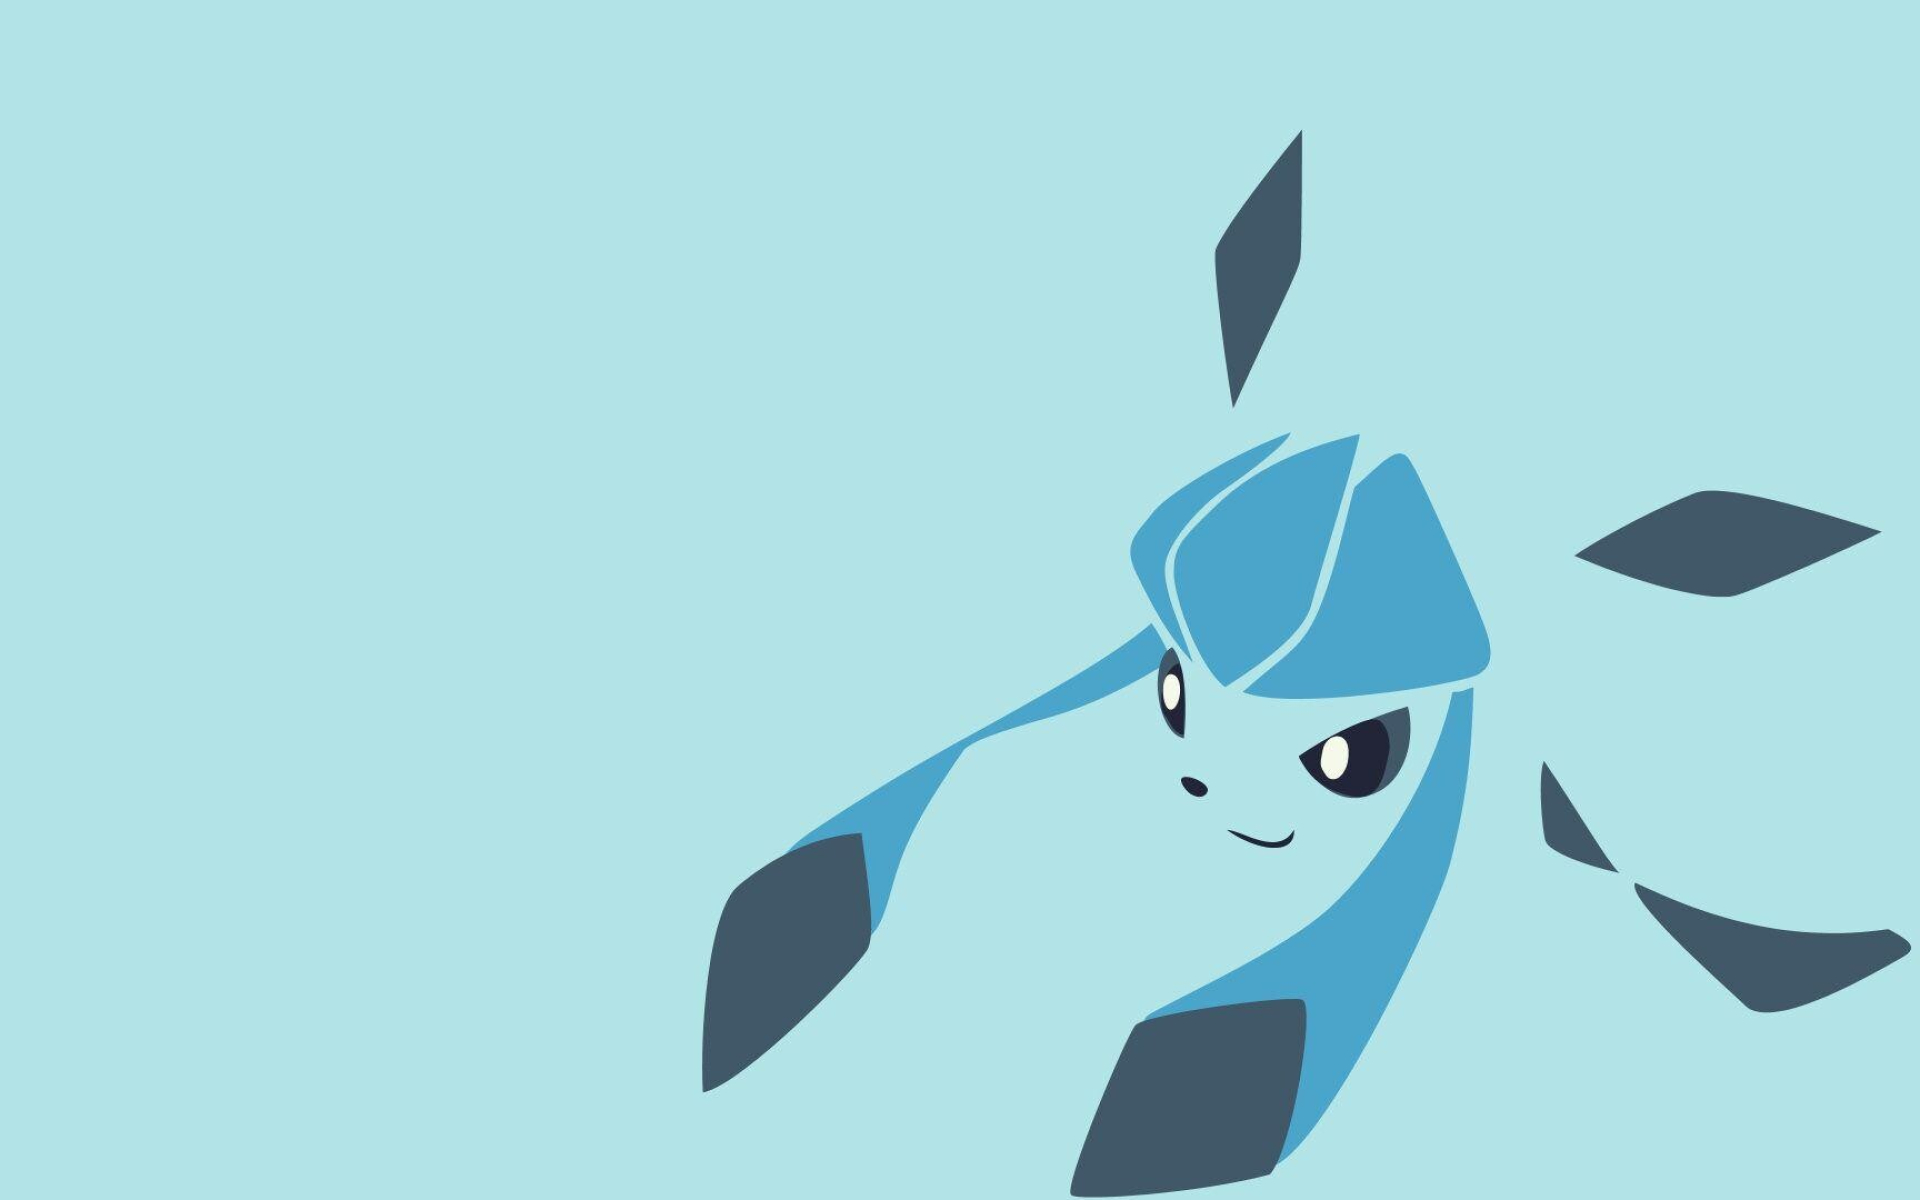 Glaceon: Creature with a light-blue fur, Diamond-shaped patterns on the back, Shooting the spiky icicle fur. 1920x1200 HD Wallpaper.